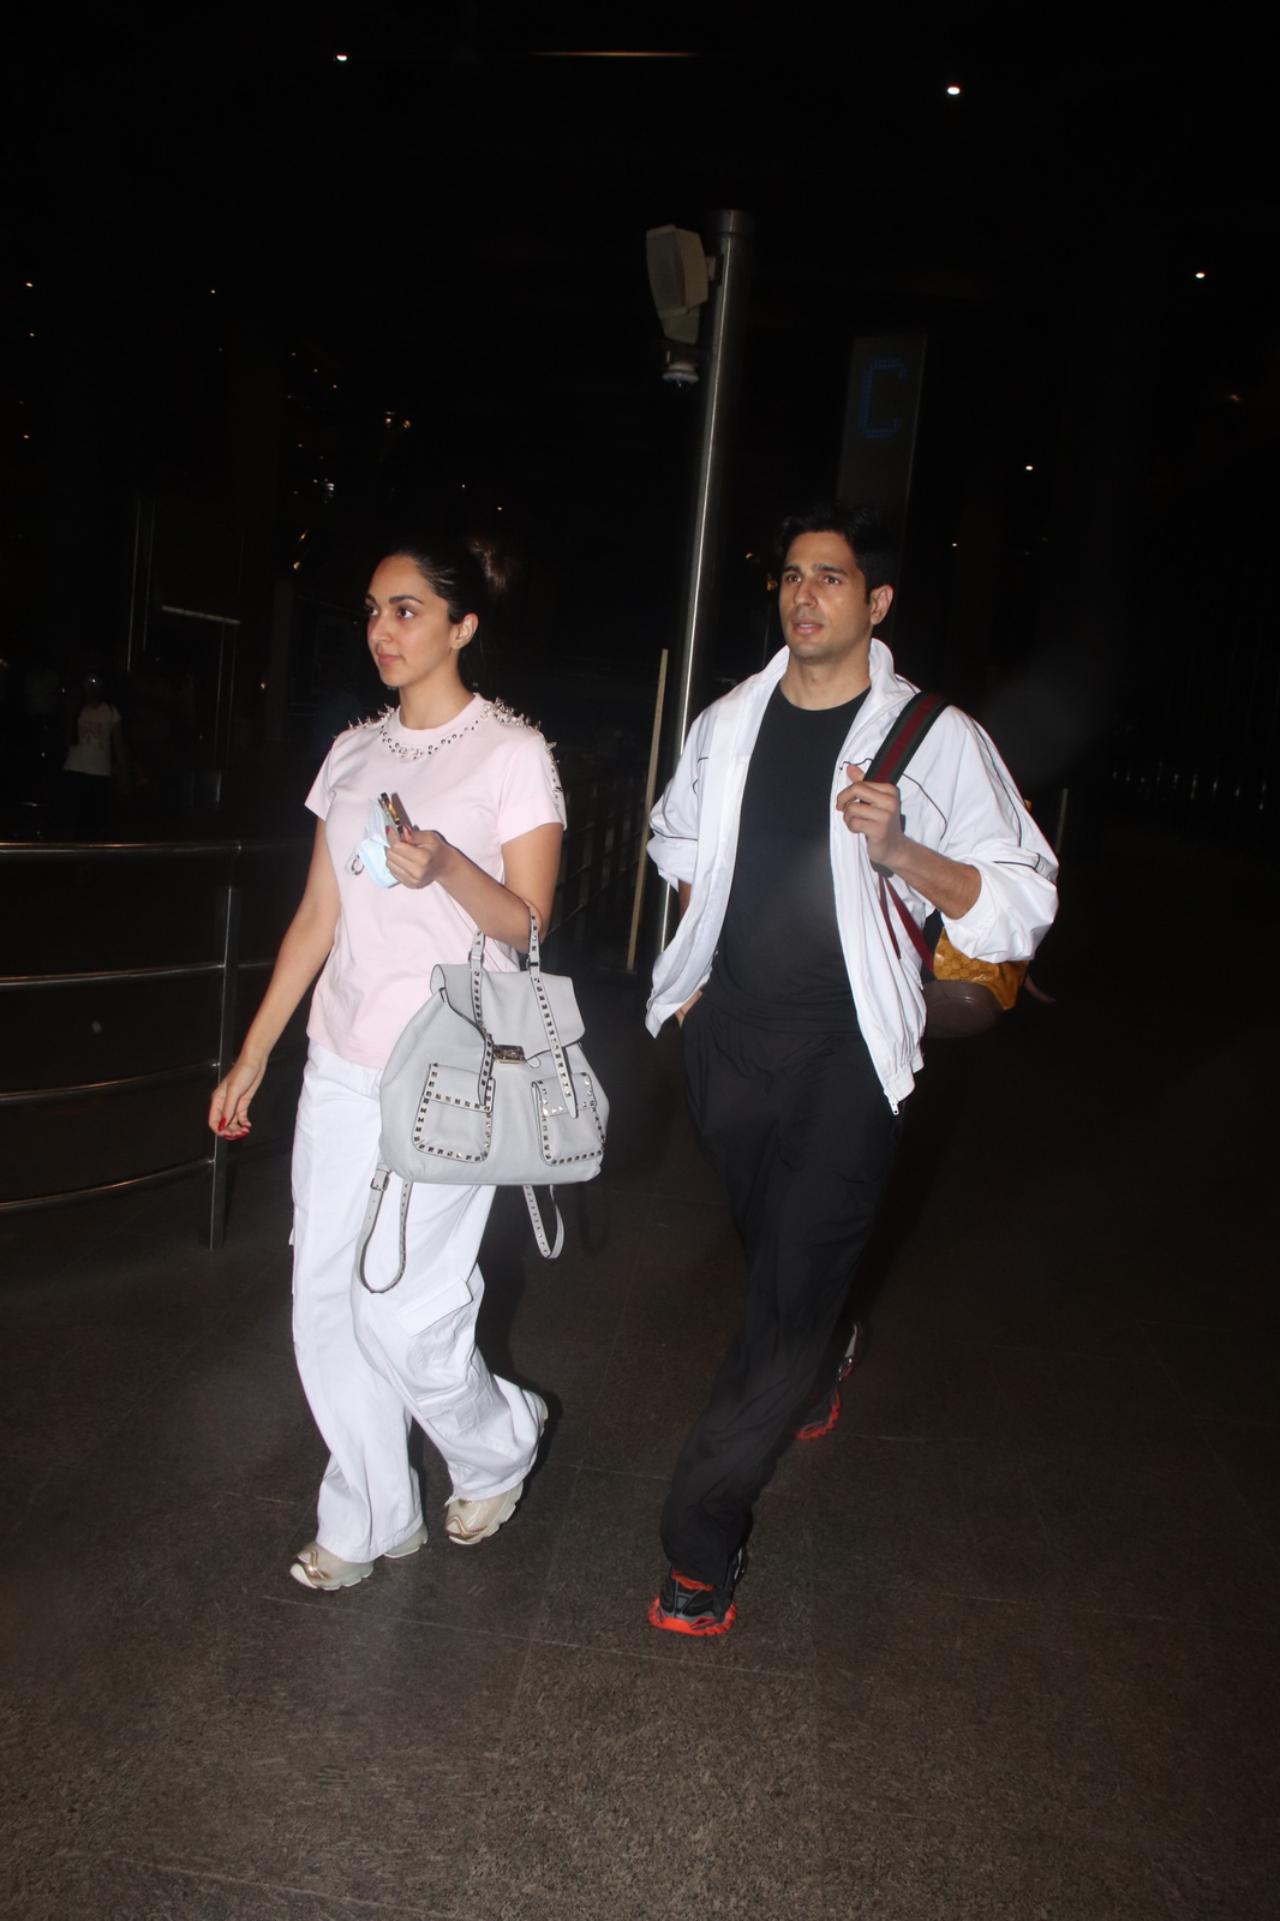 Kiara and Sidharth were spotted at the Mumbai airport at the wee hours on Tuesday morning as they made their way back from Dubai. The couple had visited the Middle-East country to ring in the New Year